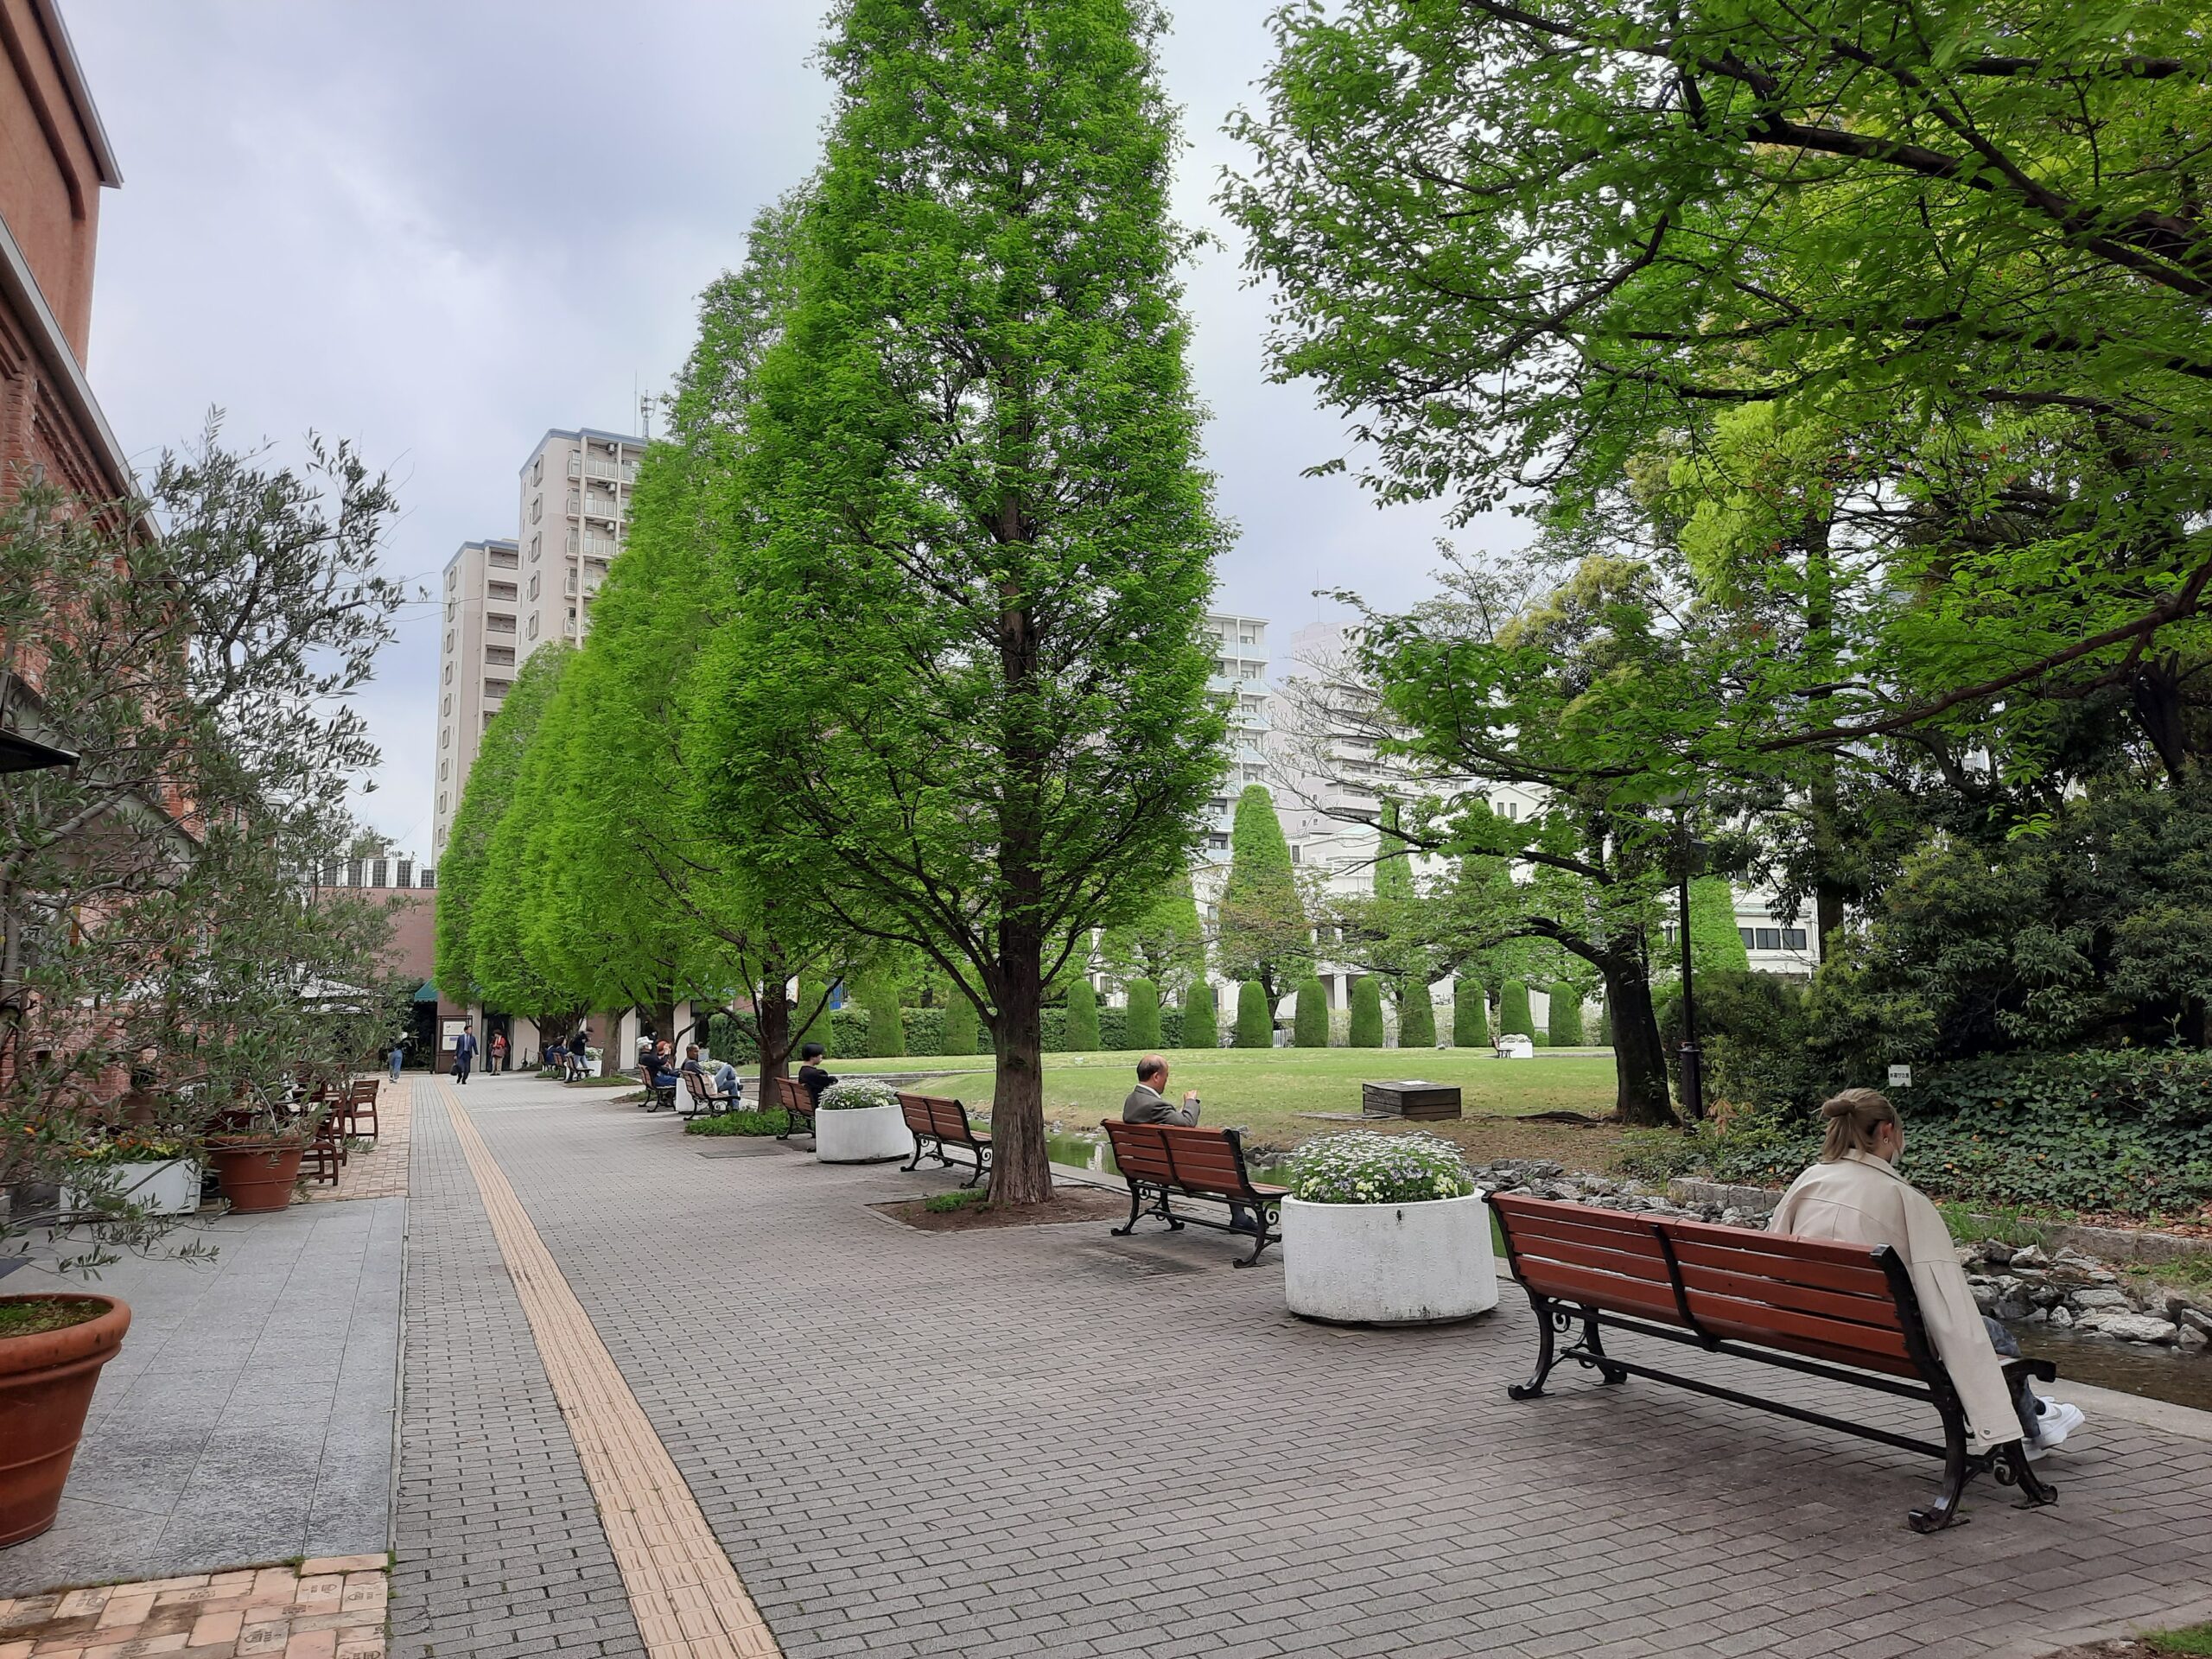 garden, trees, benches, buildings, flowers, persons, plants